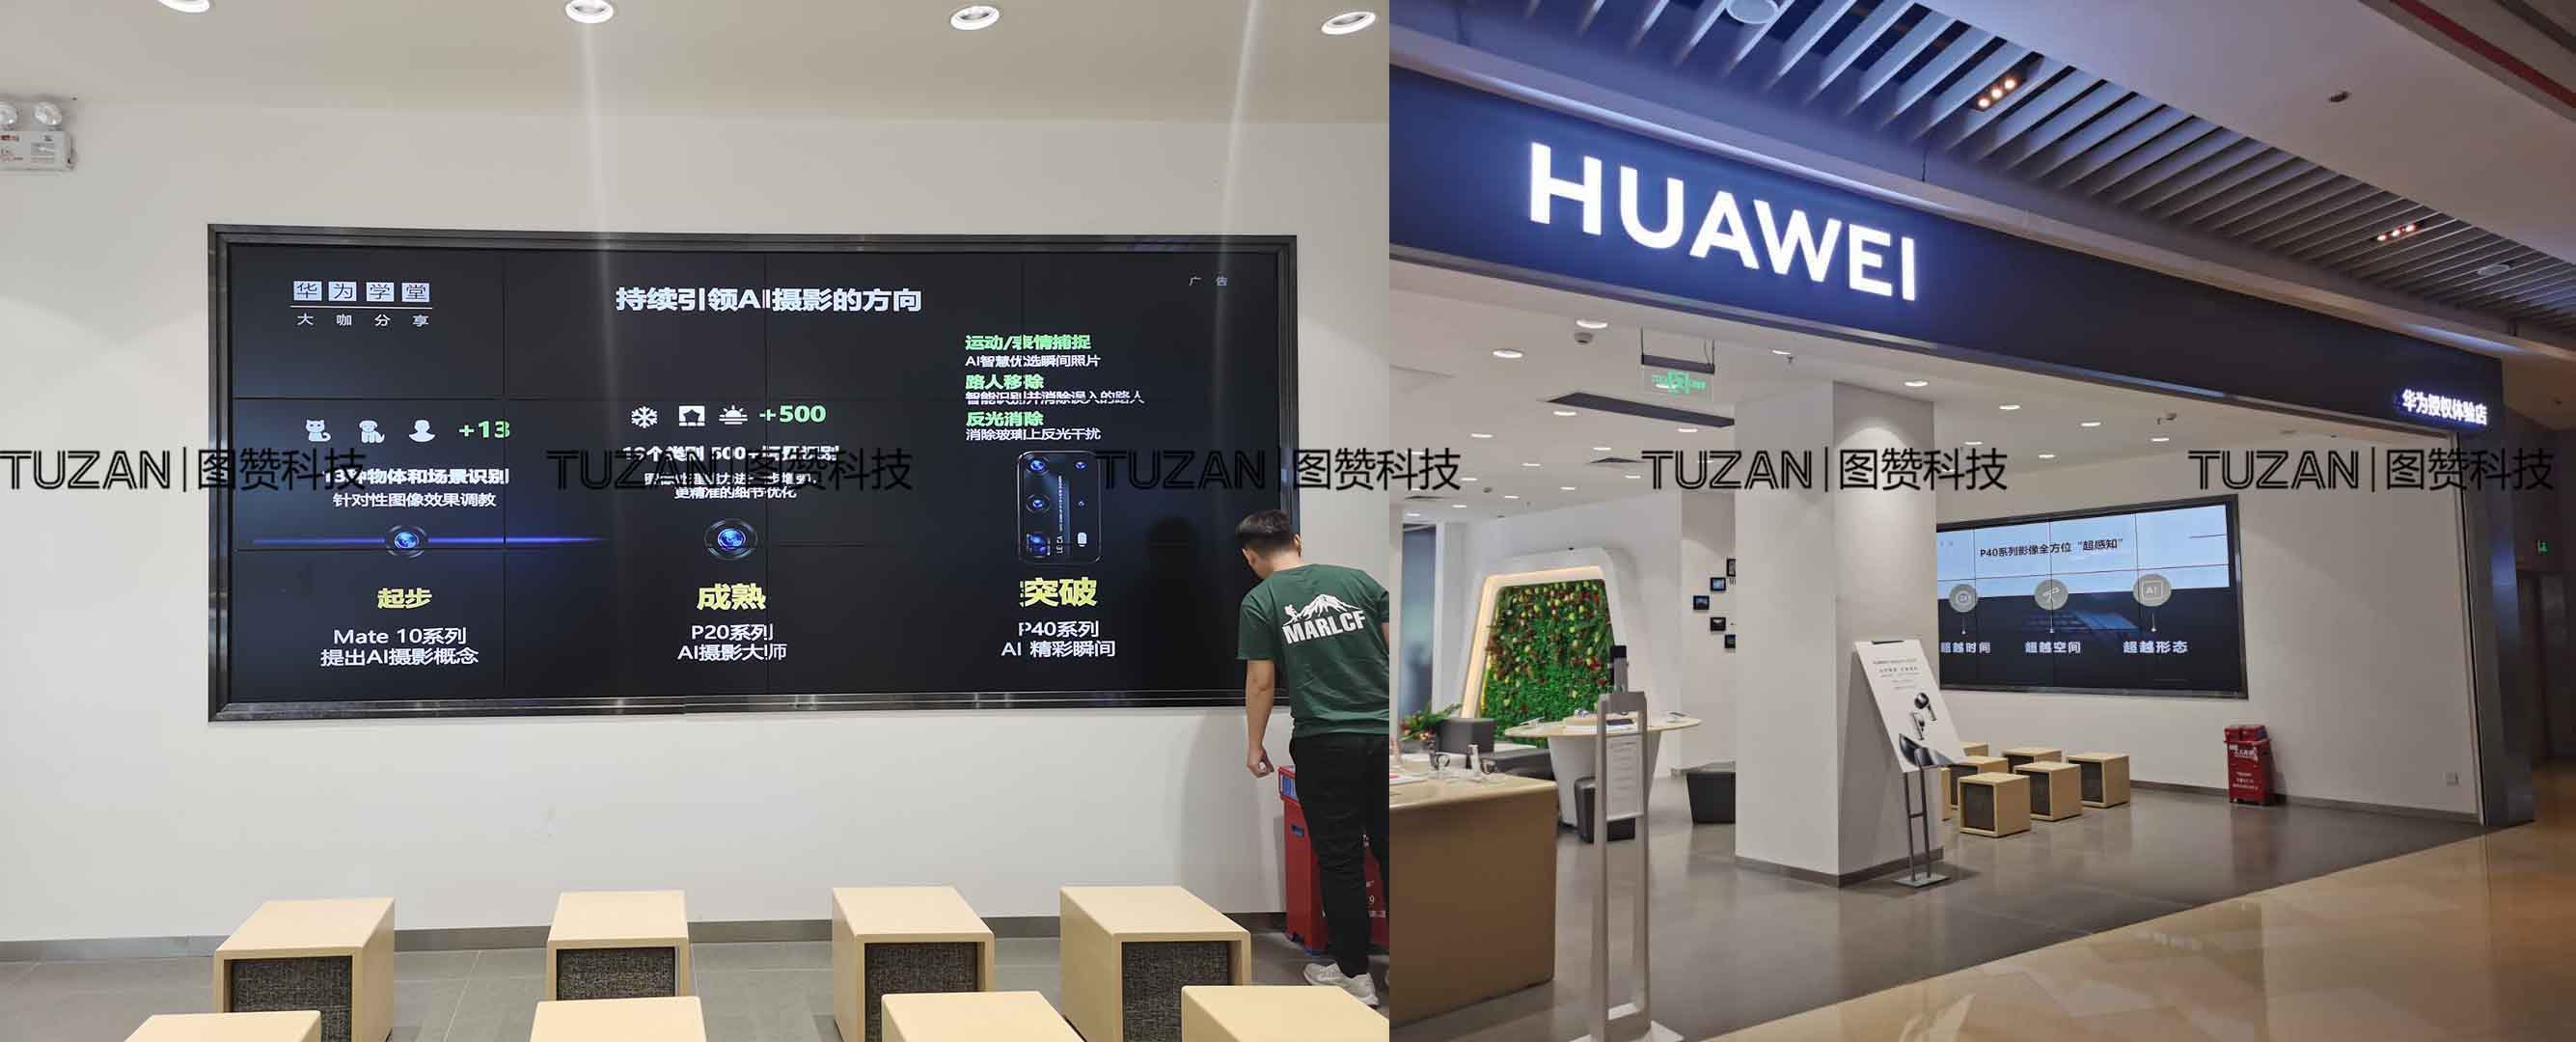 Huawei opens its largest flagship store to customers - CnTechPost